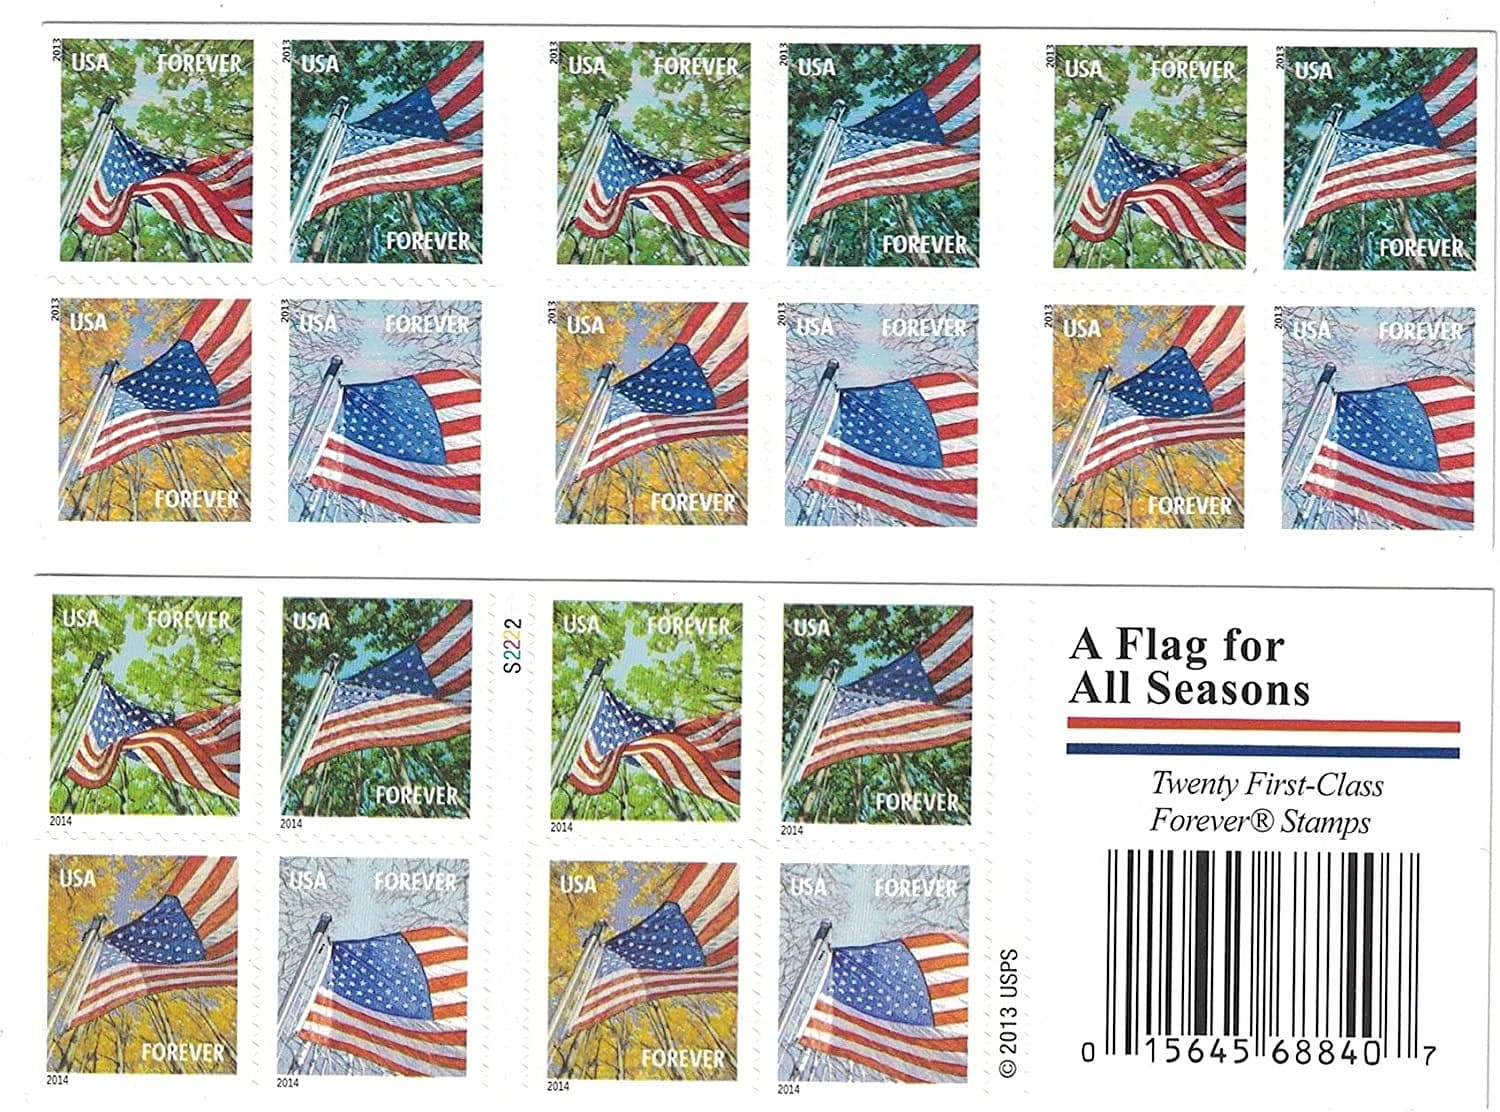 How to Sell Forever Stamps